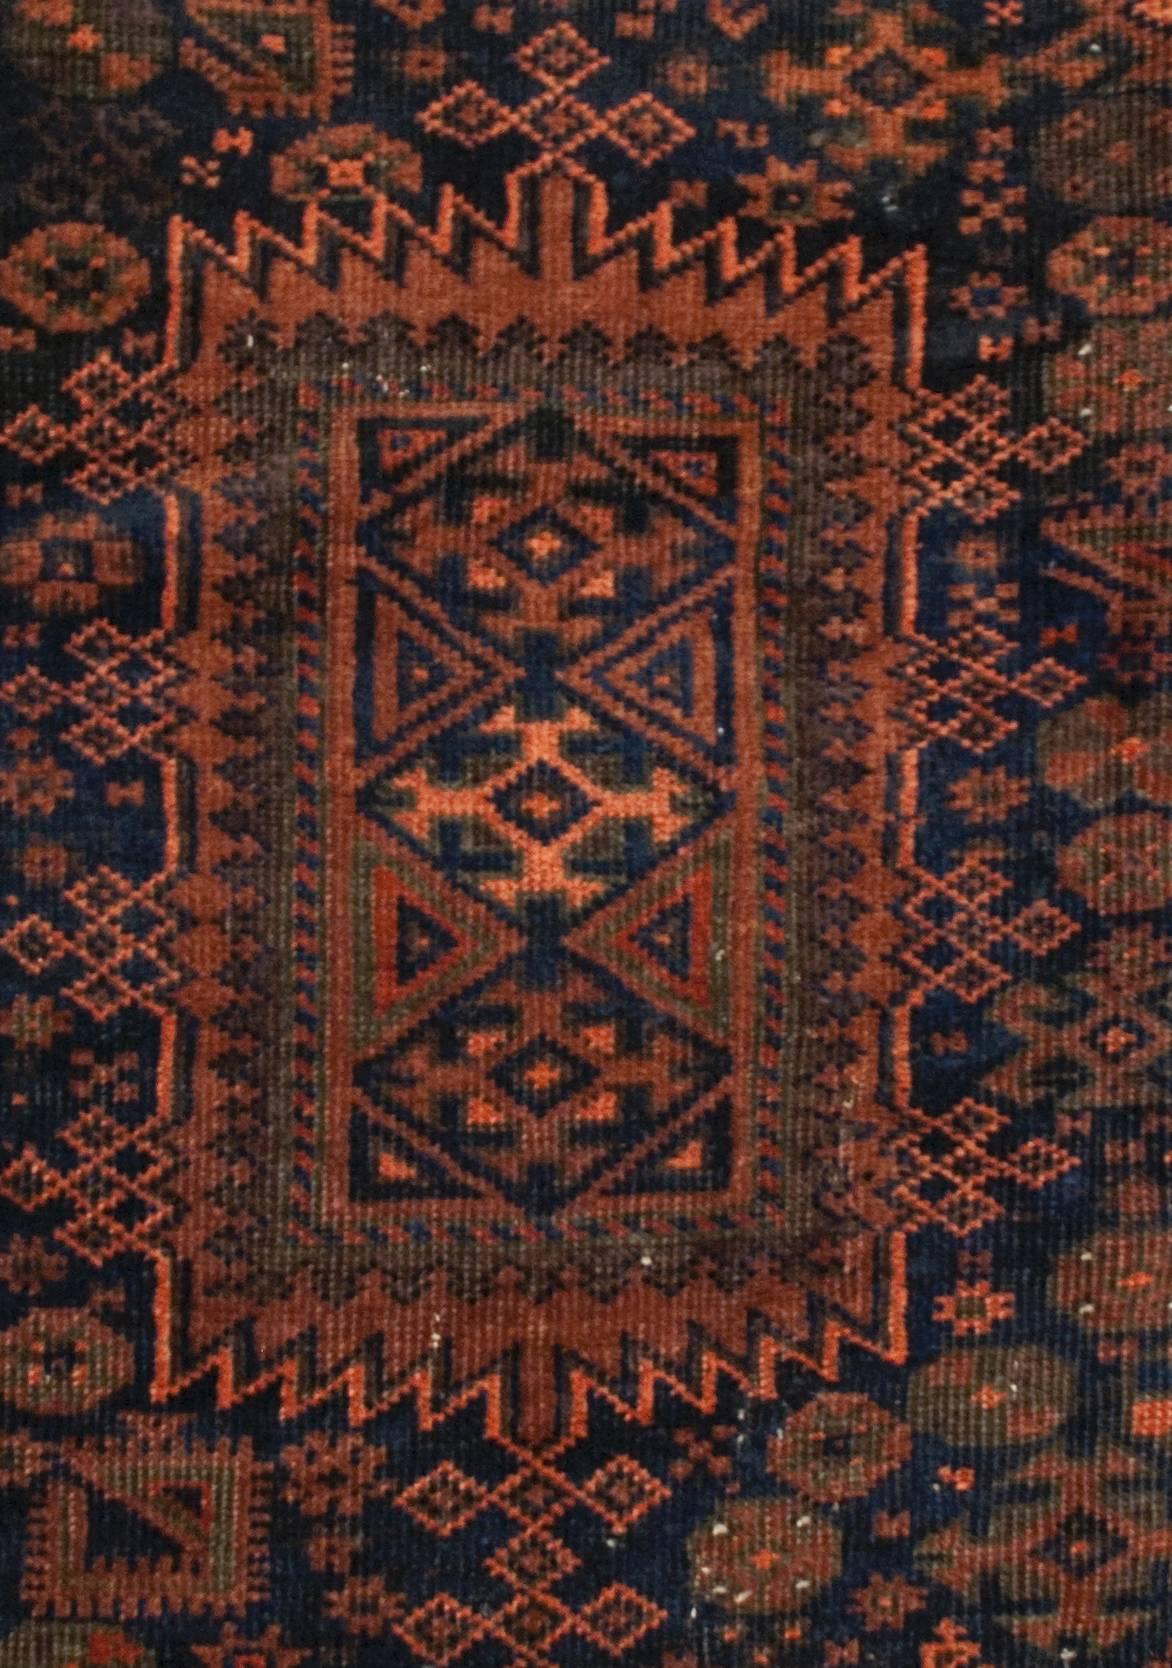 Vegetable Dyed Early 20th Century Baluch Rug